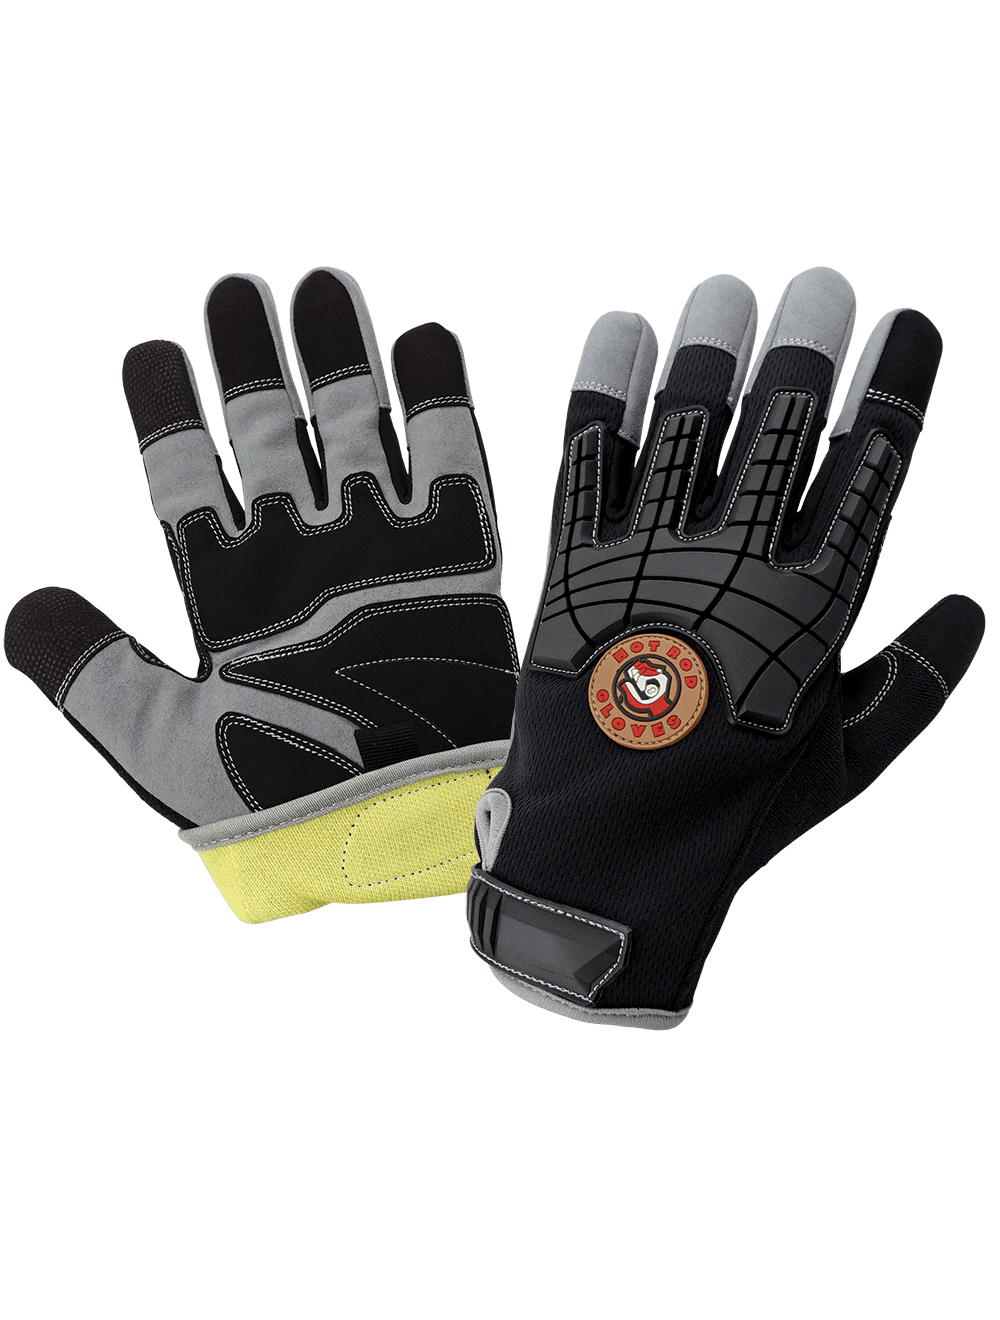 Hot Rod Gloves® Premium Synthetic Leather Palm Performance Mechanics Style Gloves with a Cut Resistant Liner, Impact Protection, and a Mesh Back - HR8200KEV